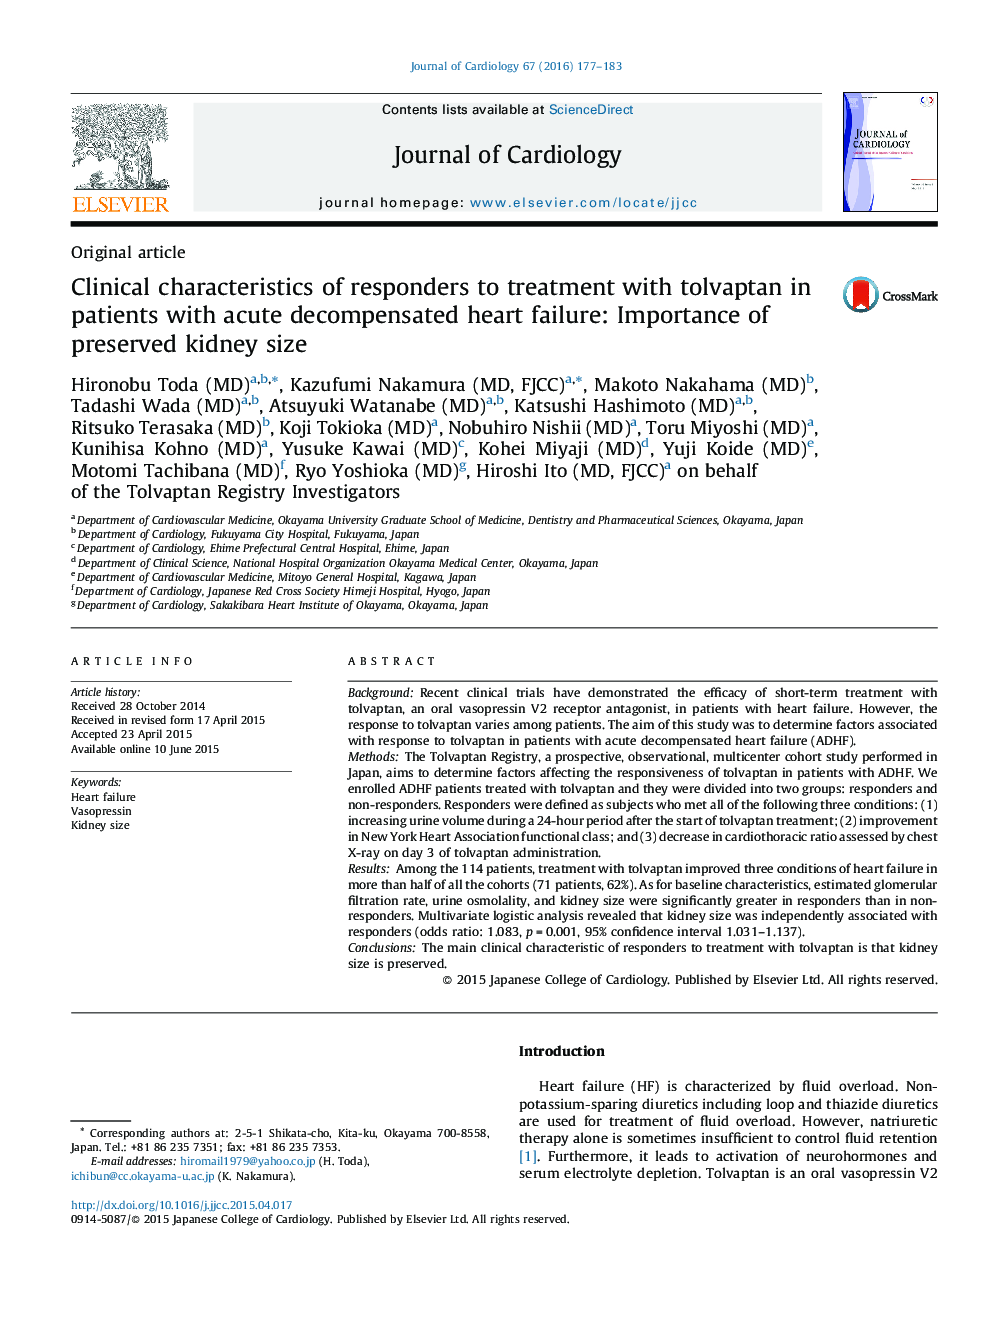 Clinical characteristics of responders to treatment with tolvaptan in patients with acute decompensated heart failure: Importance of preserved kidney size